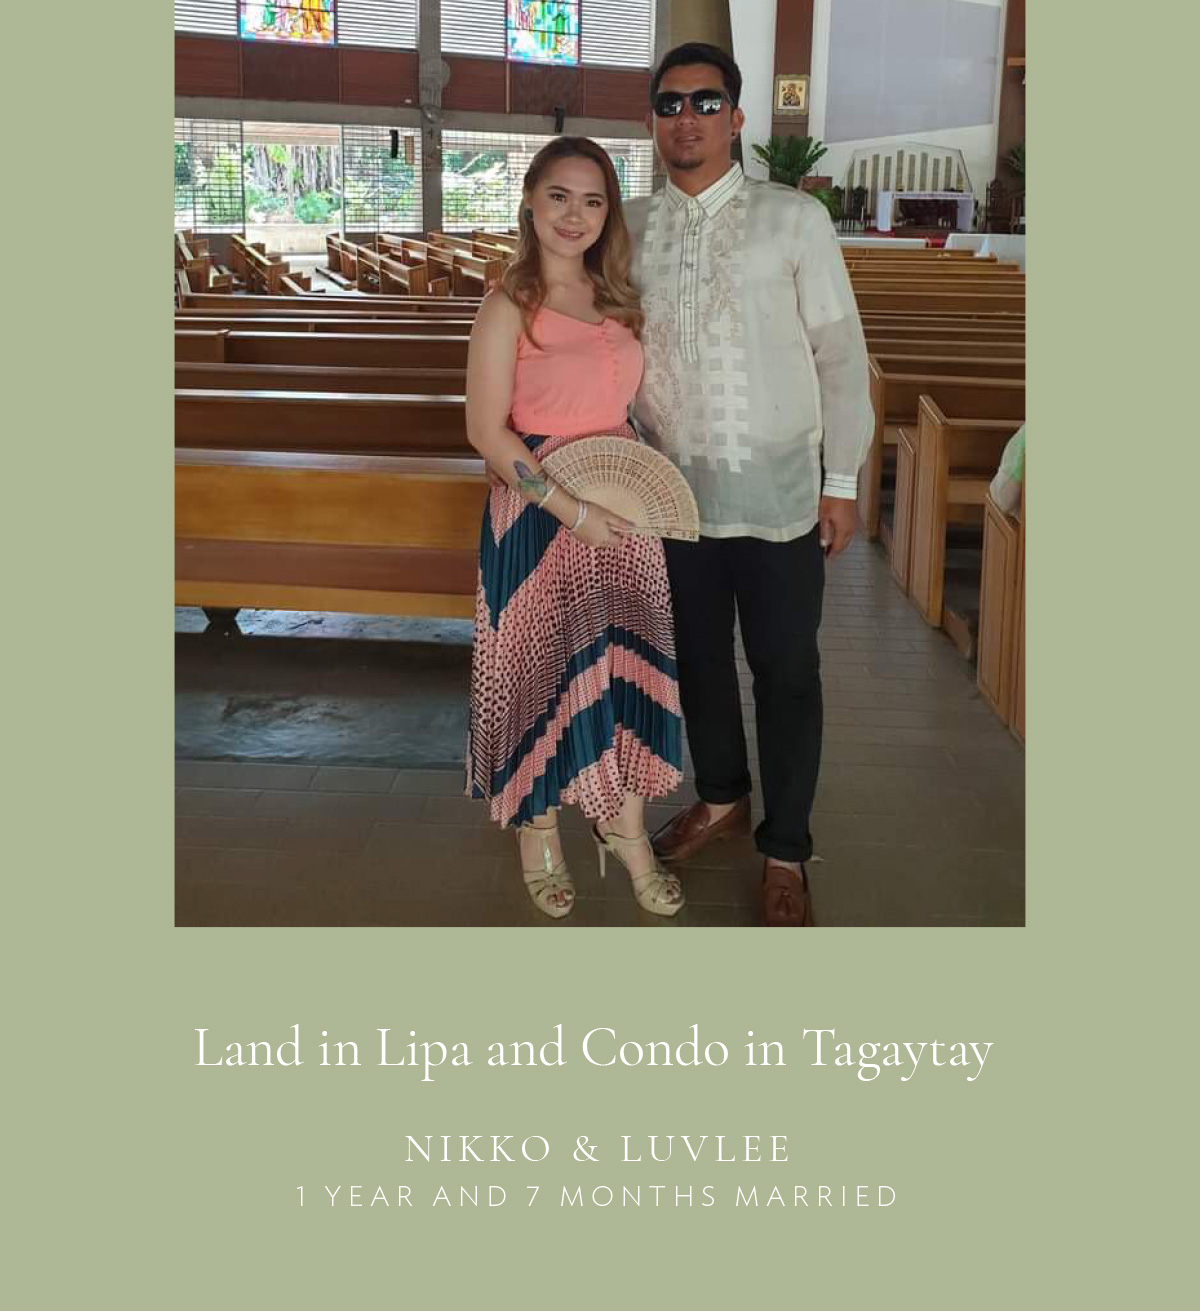 (Layout with photo) Land in Lipa and Condo in Tagaytay - Nikko and Luvlee, 1 year and 7 months married